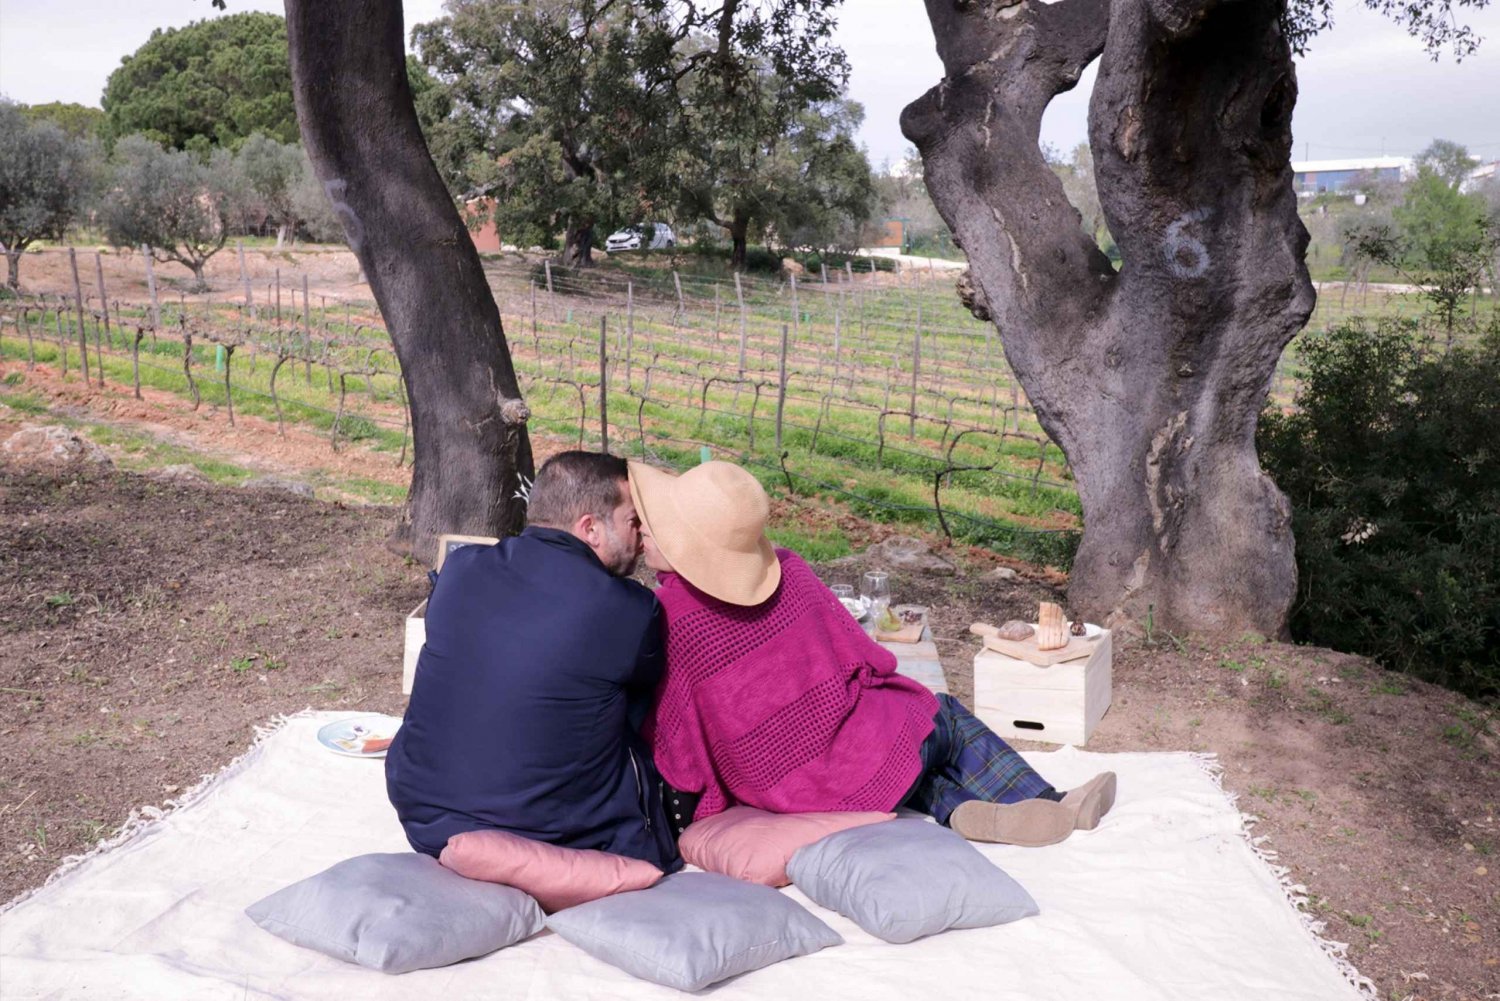 Algarve Private Picnic in the Vineyard with Wine Pairing